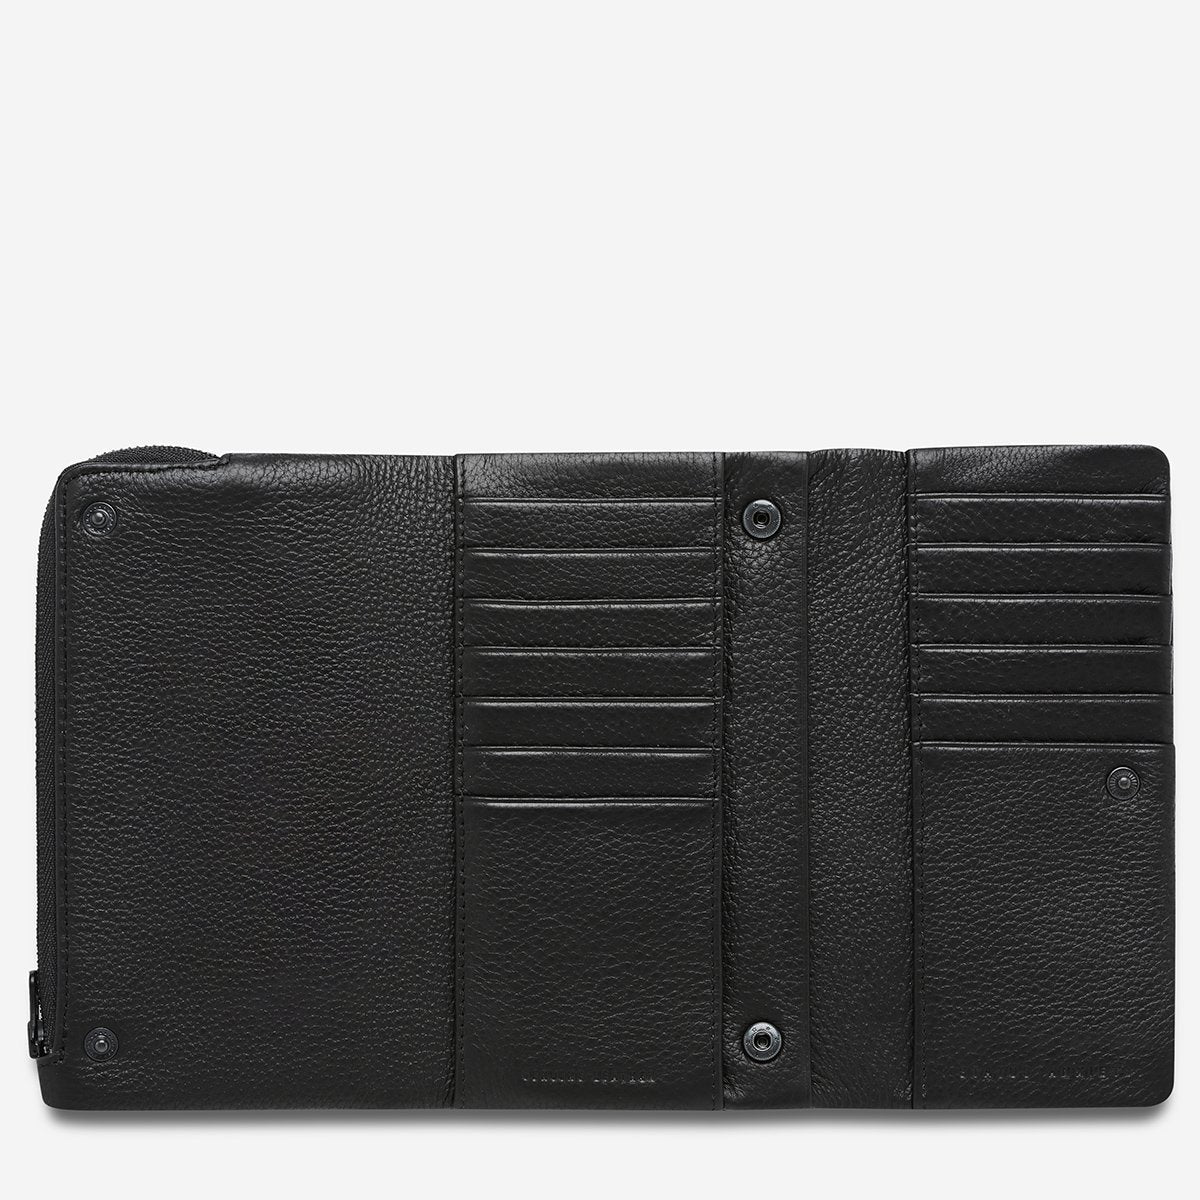 Status Anxiety Audrey Wallet in Black Pebble opened